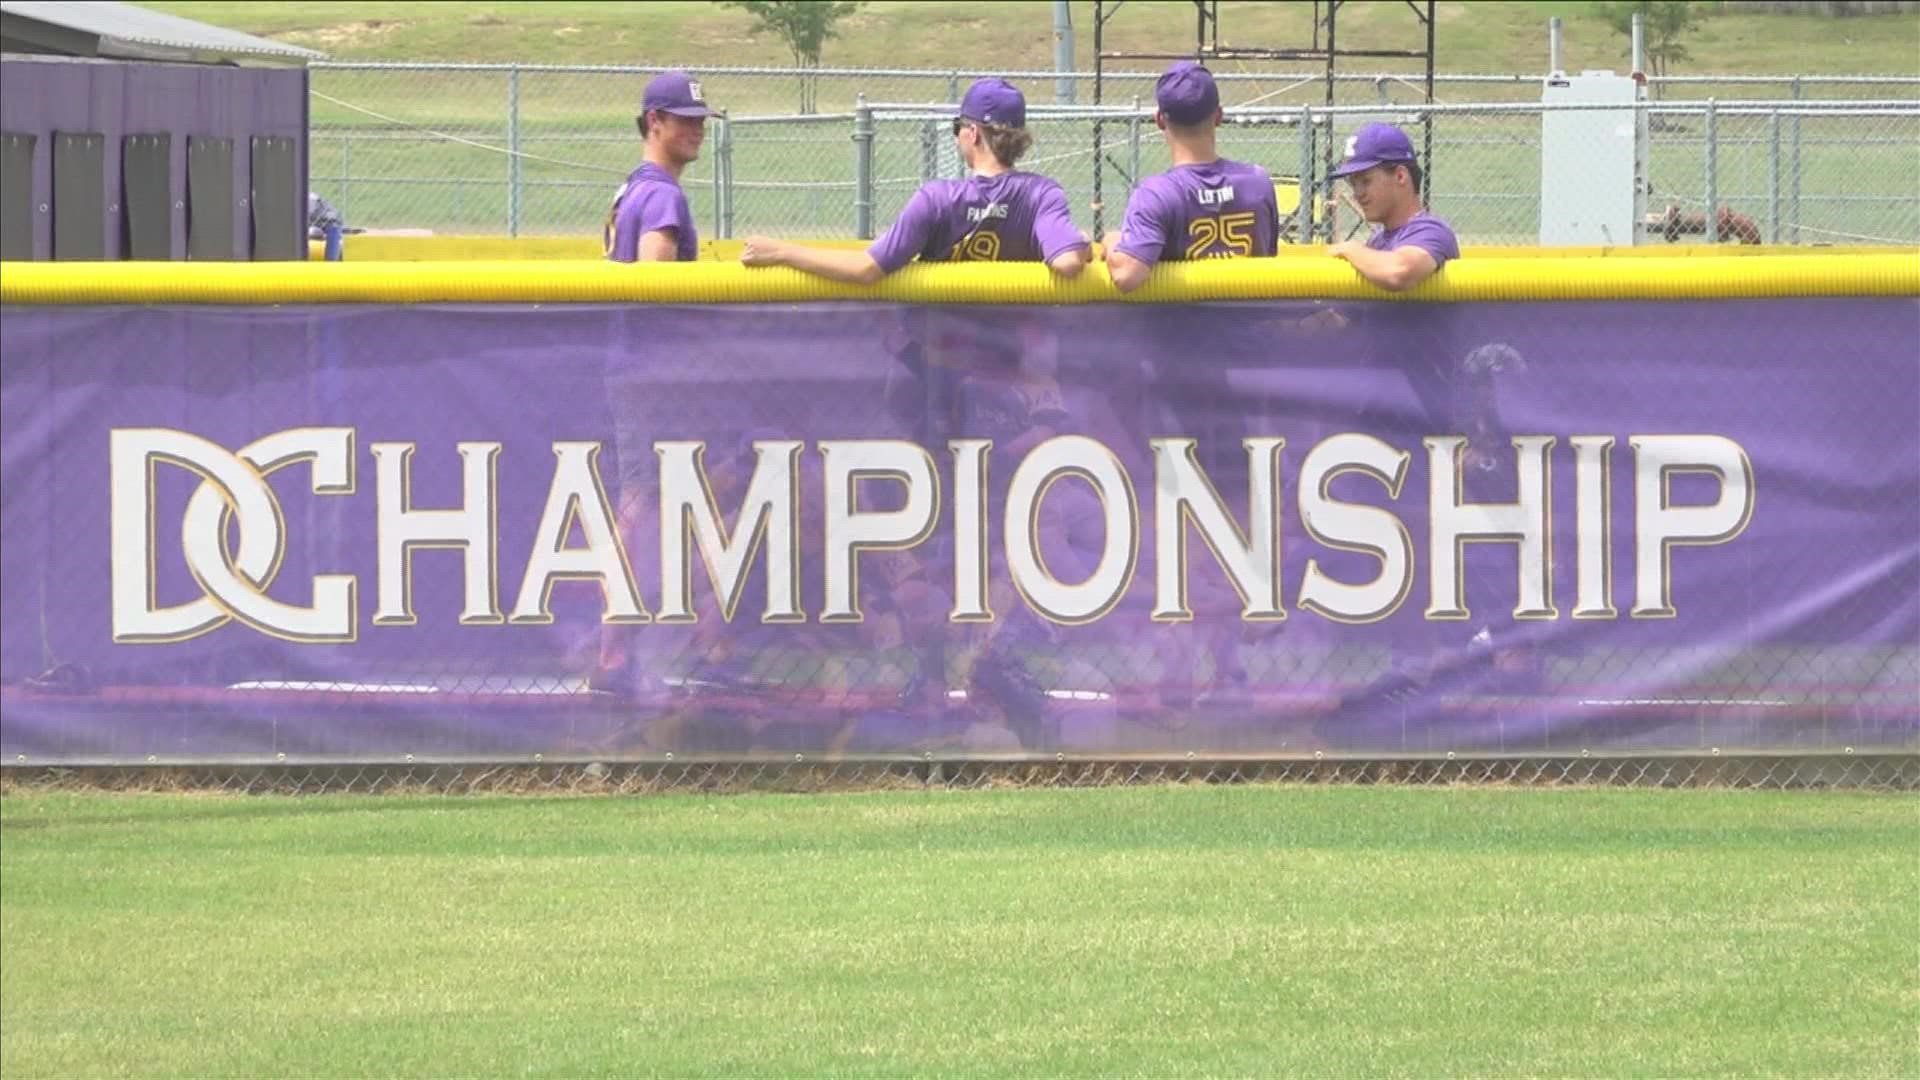 Desoto Central won its last championship in 2019, and now the team is pressing for another title.